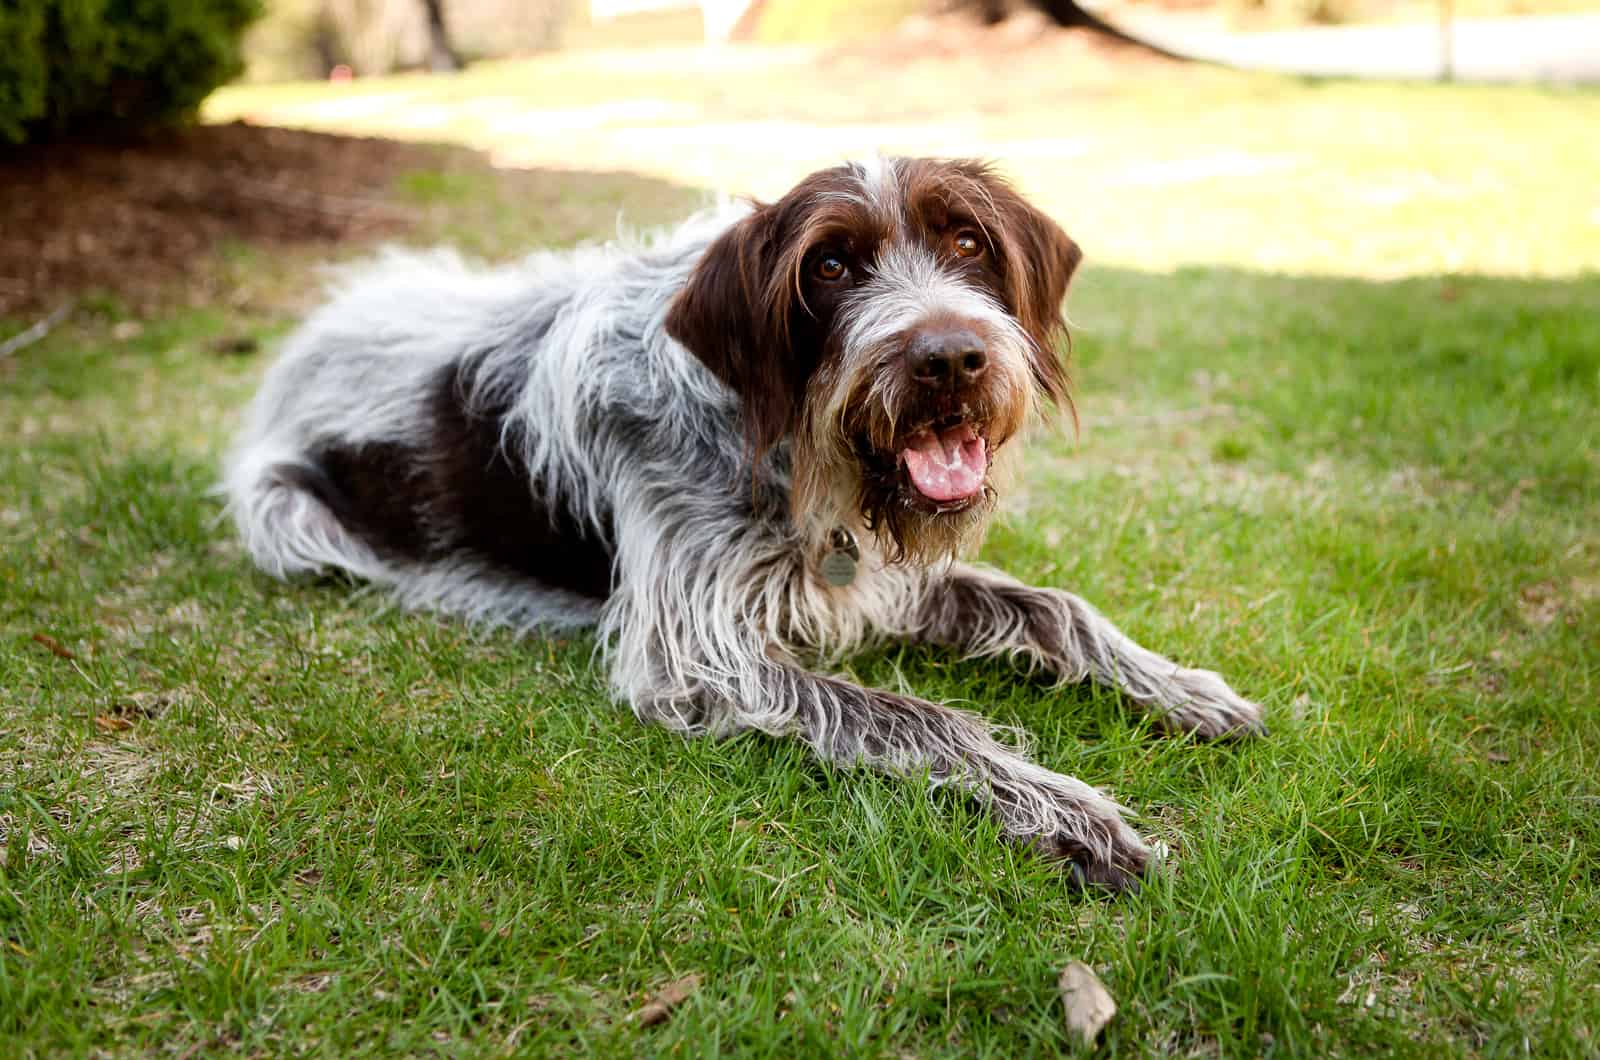 wirehaired pointing griffon dog relaxing in the cool green grass